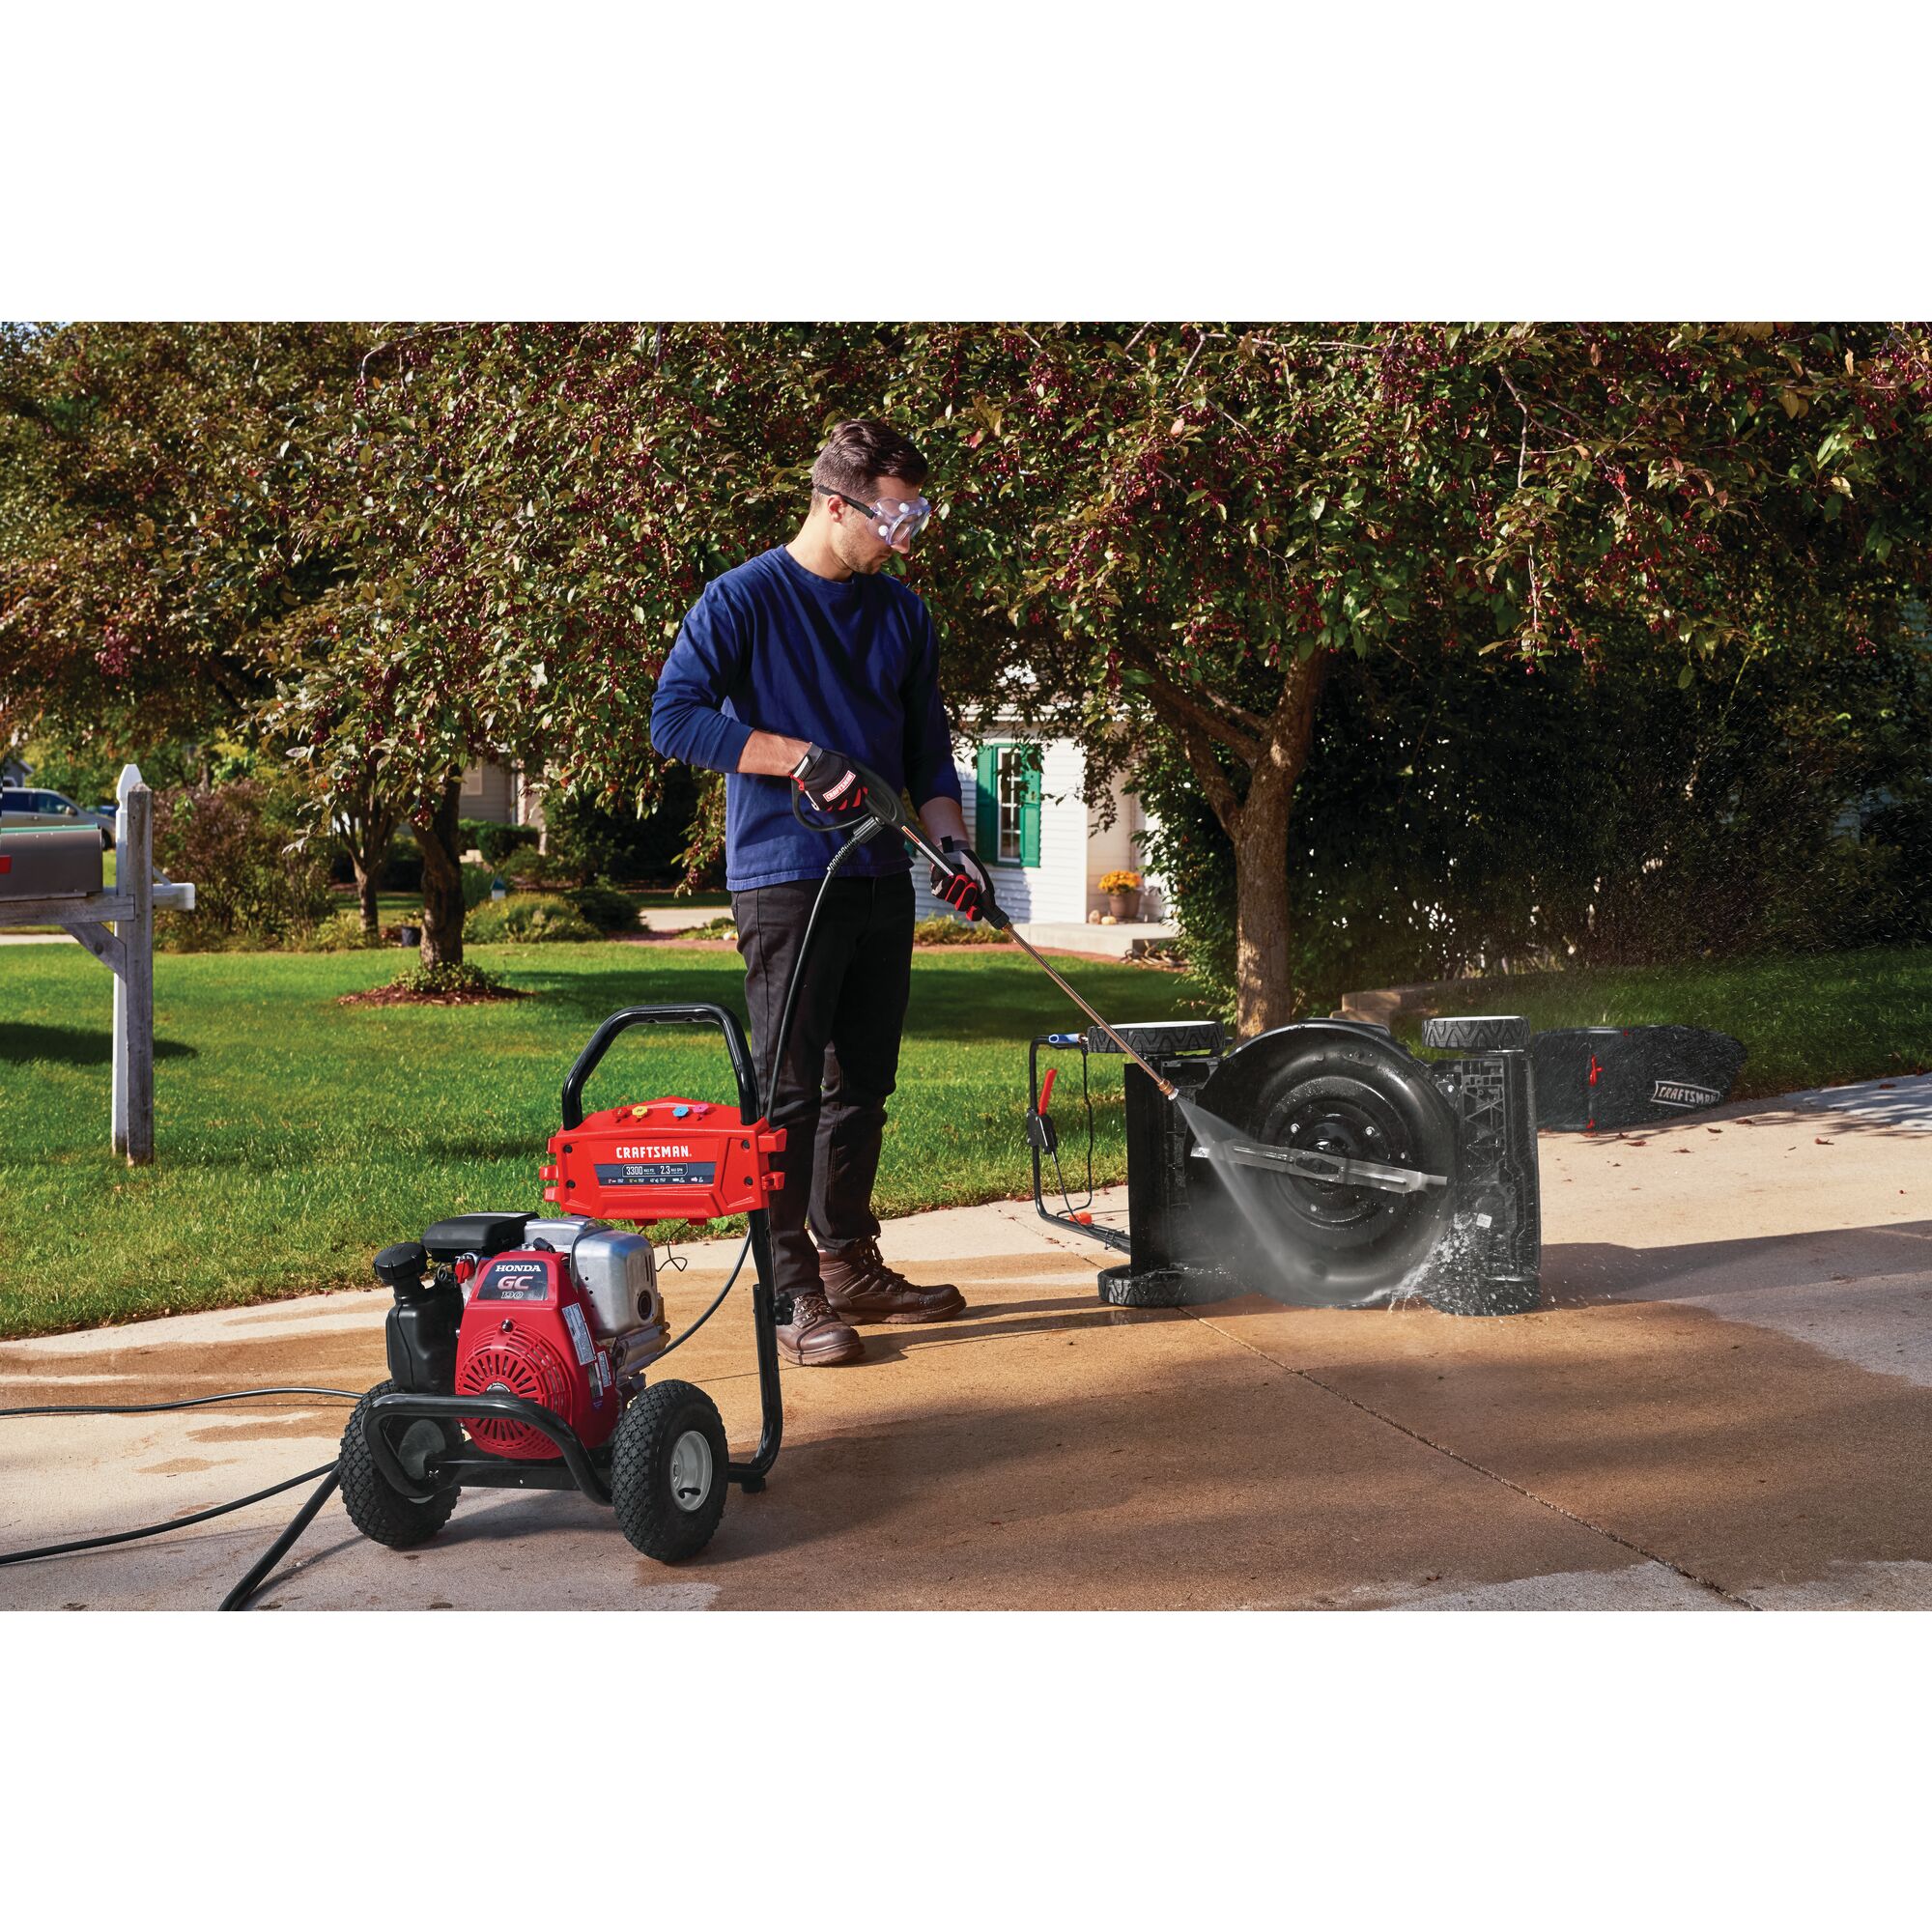 3300 Max P S I / 2.3 max G P M Pressure washer being used by a person to wash item.